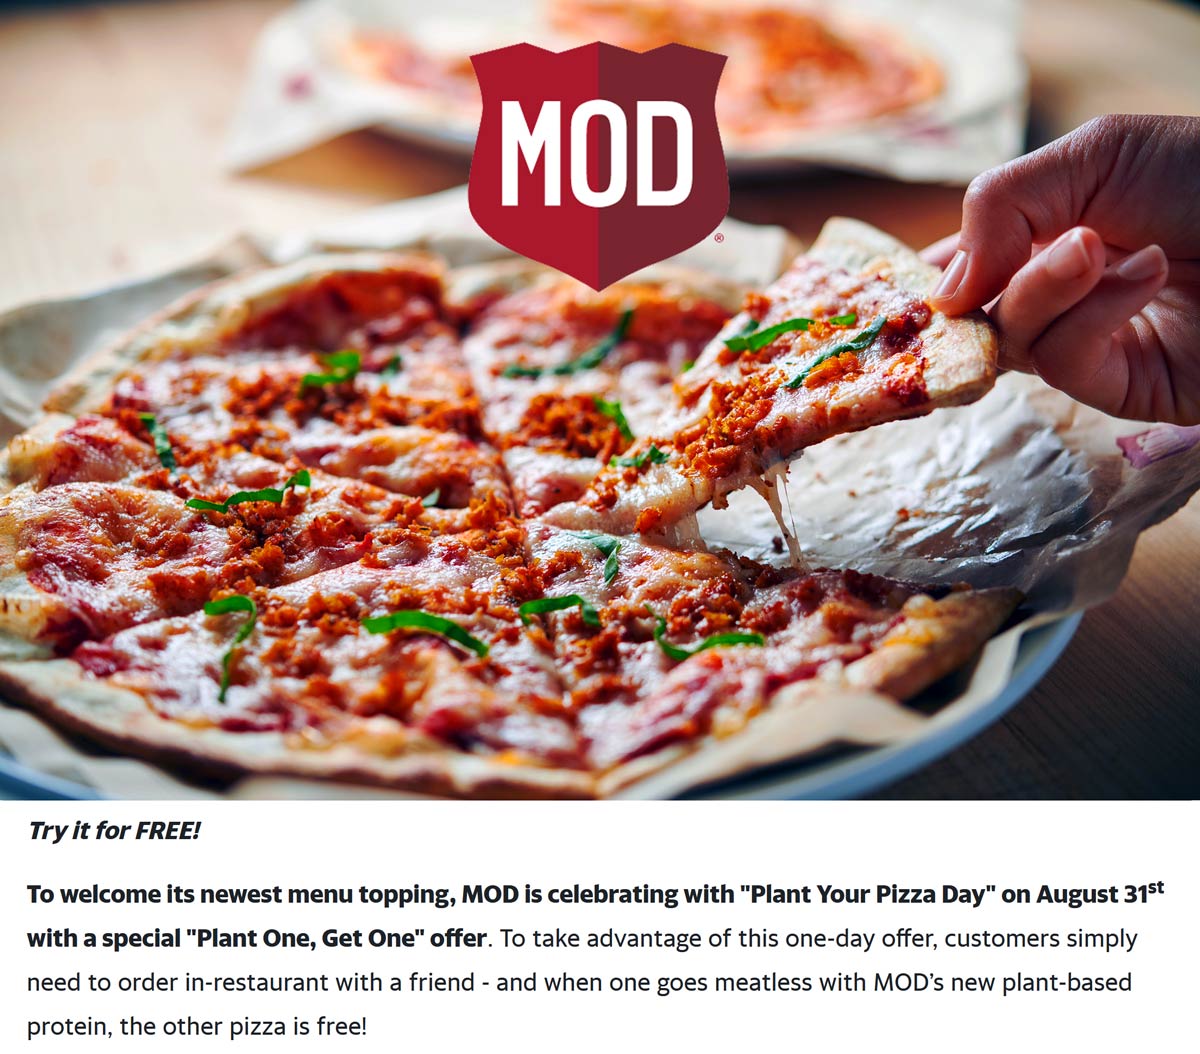 MOD restaurants Coupon  Second meaty meatless pizza free Tuesday at MOD pizza #mod 